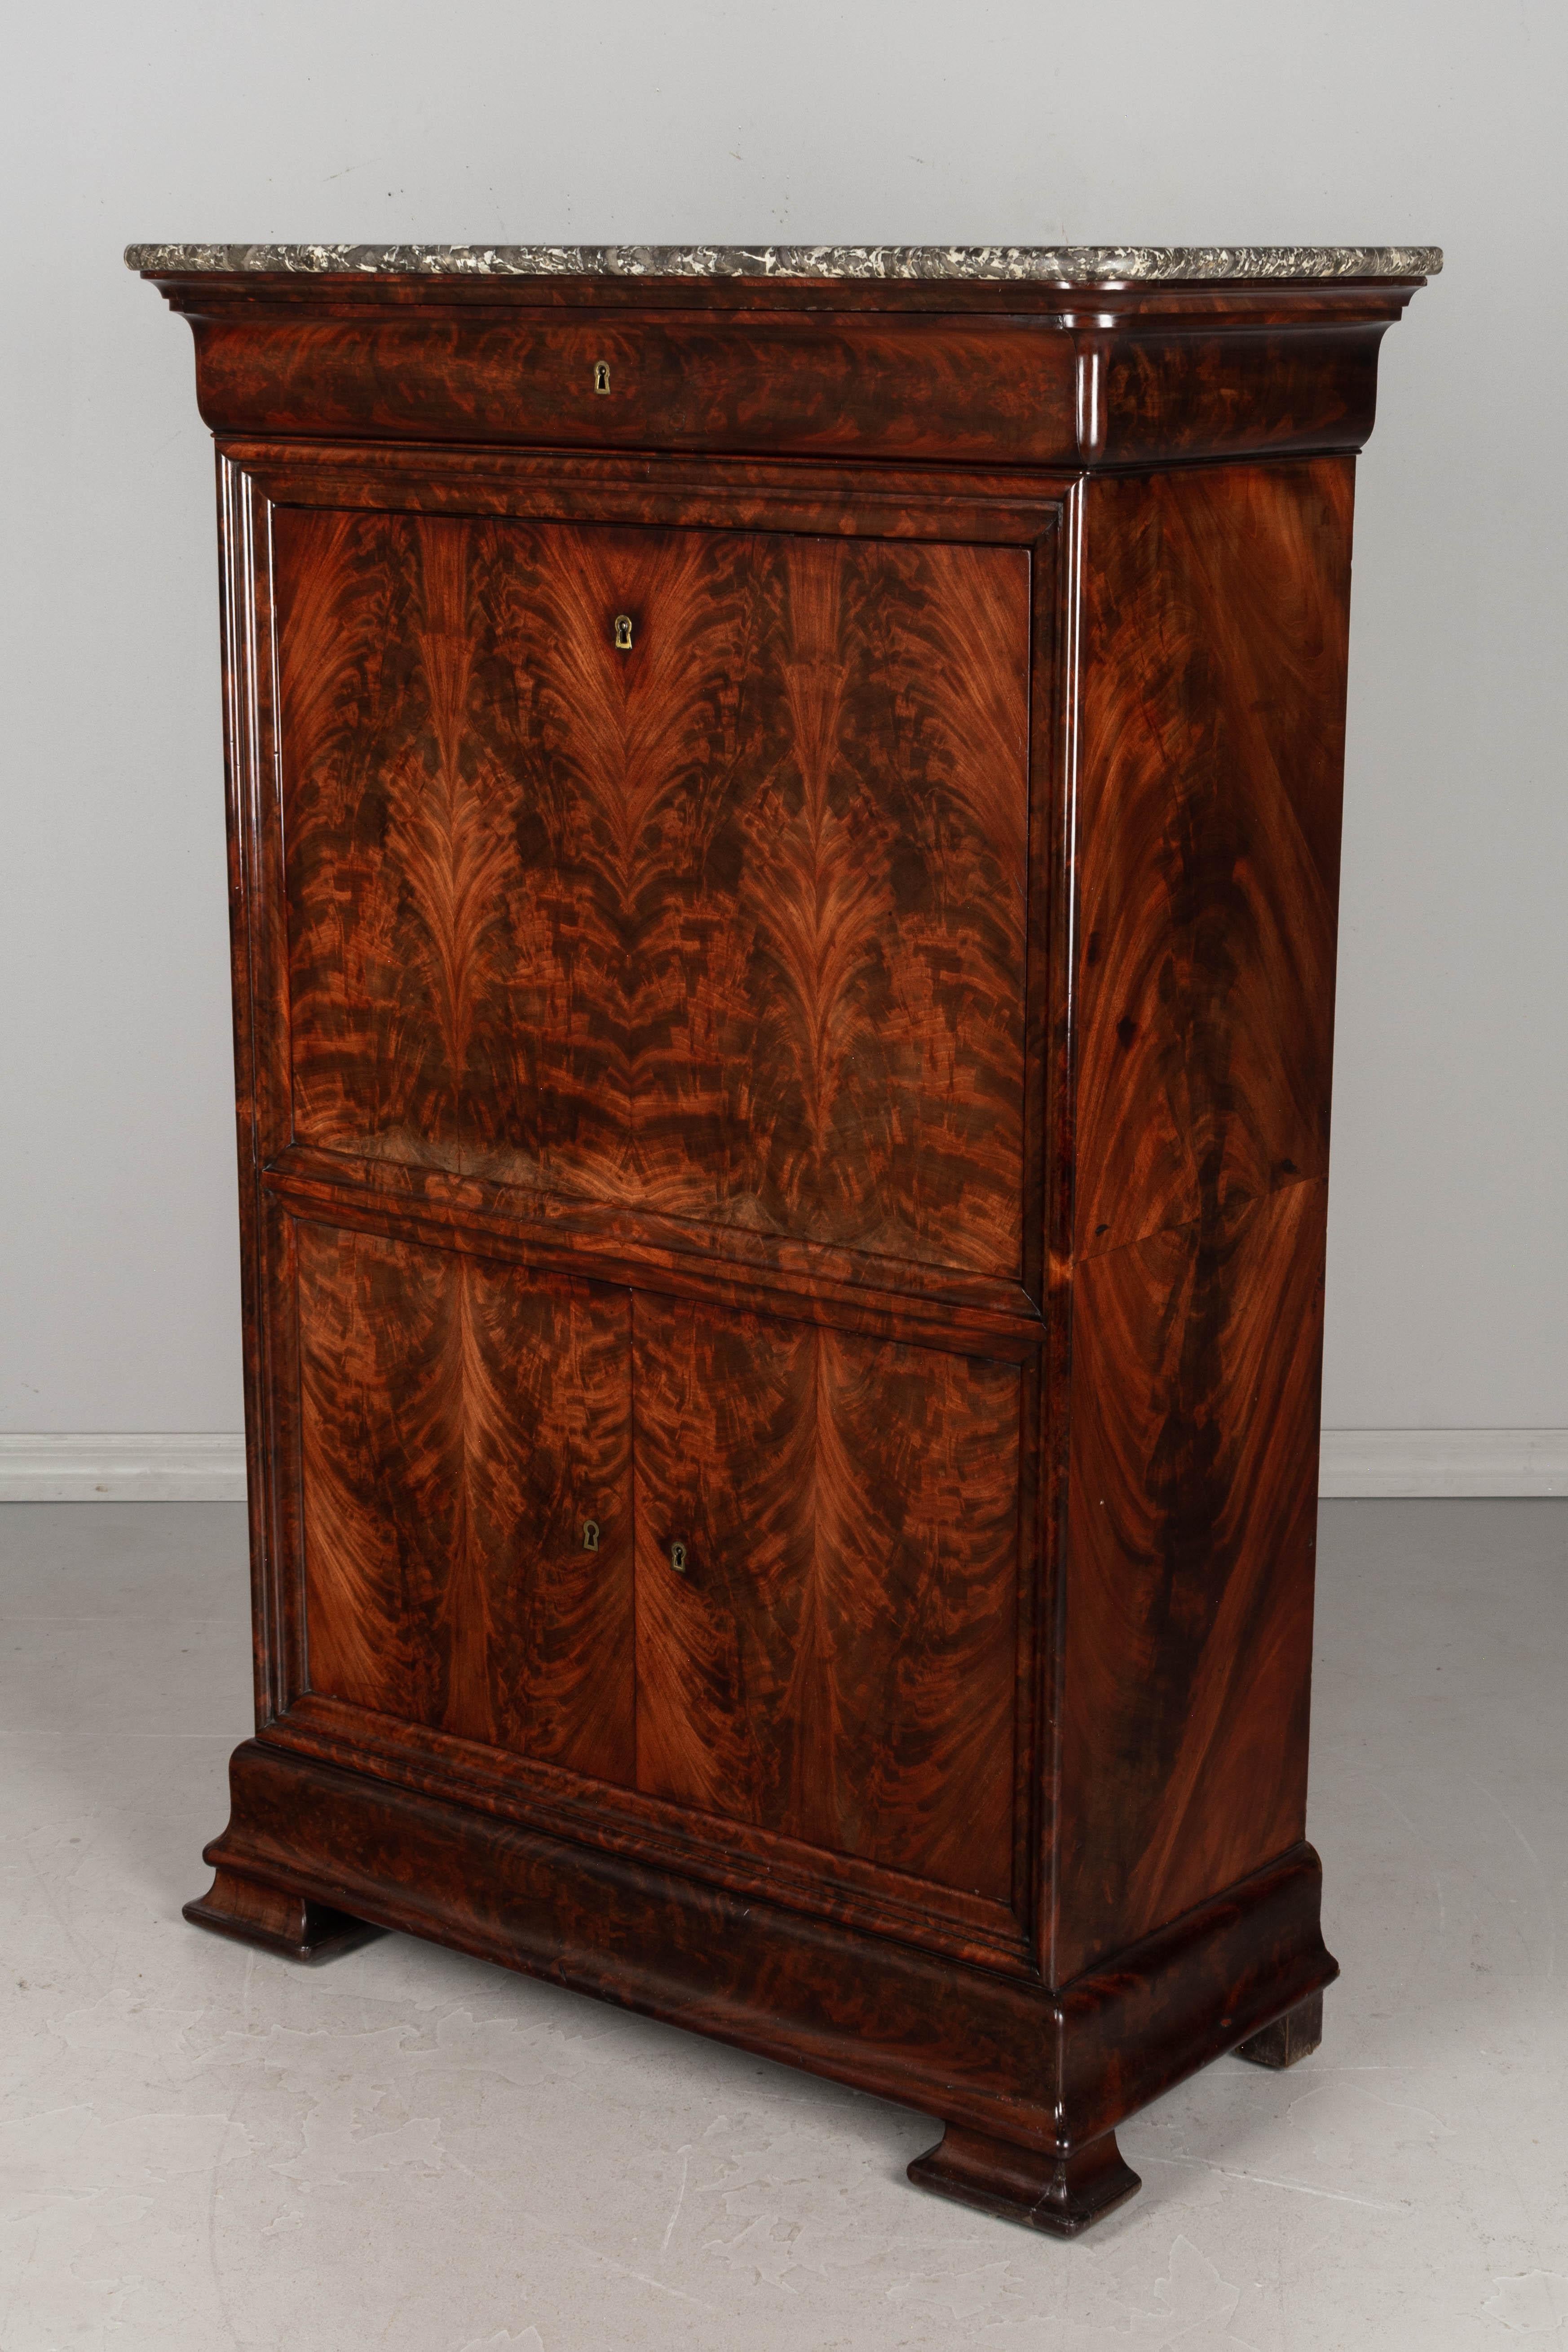 An exquisite early 19th century Louis Philippe French secretaire à abattant, or fall front secretary, made of solid mahogany with beautifully patterned flame mahogany veneer and original grey veined marble top. The main body contains one upper